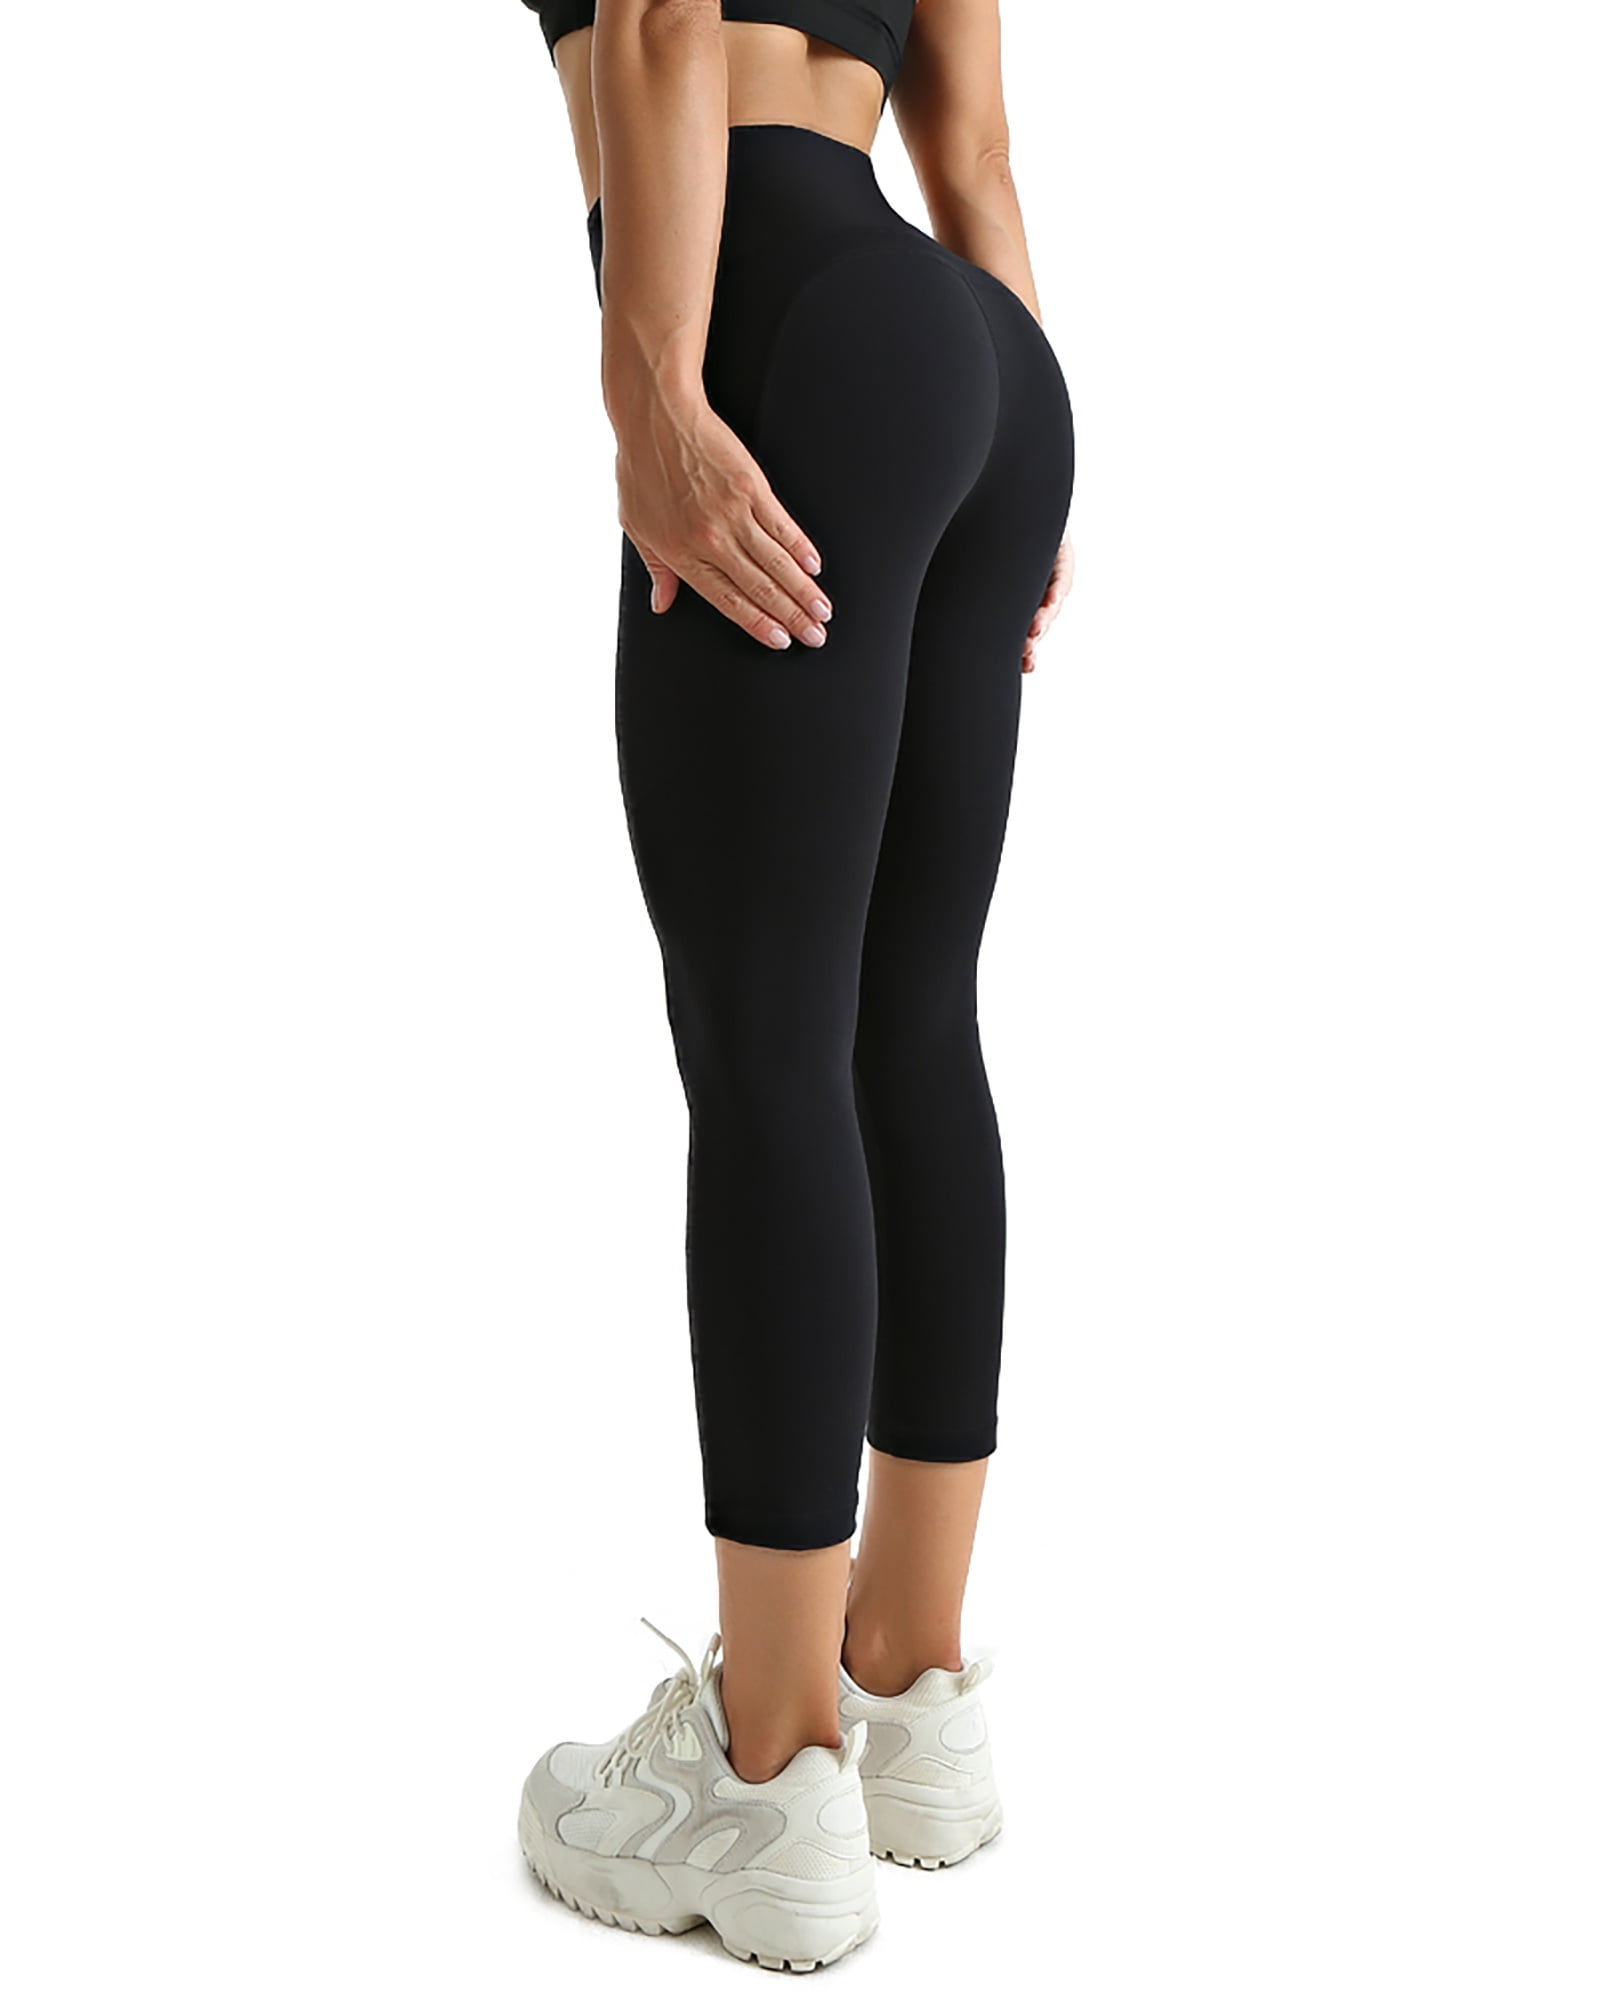 UUE 19Inseam Black High Waist Leggings,Yoga leggings for women with Pockets ,High Waisted Yoga Pants for Workout 